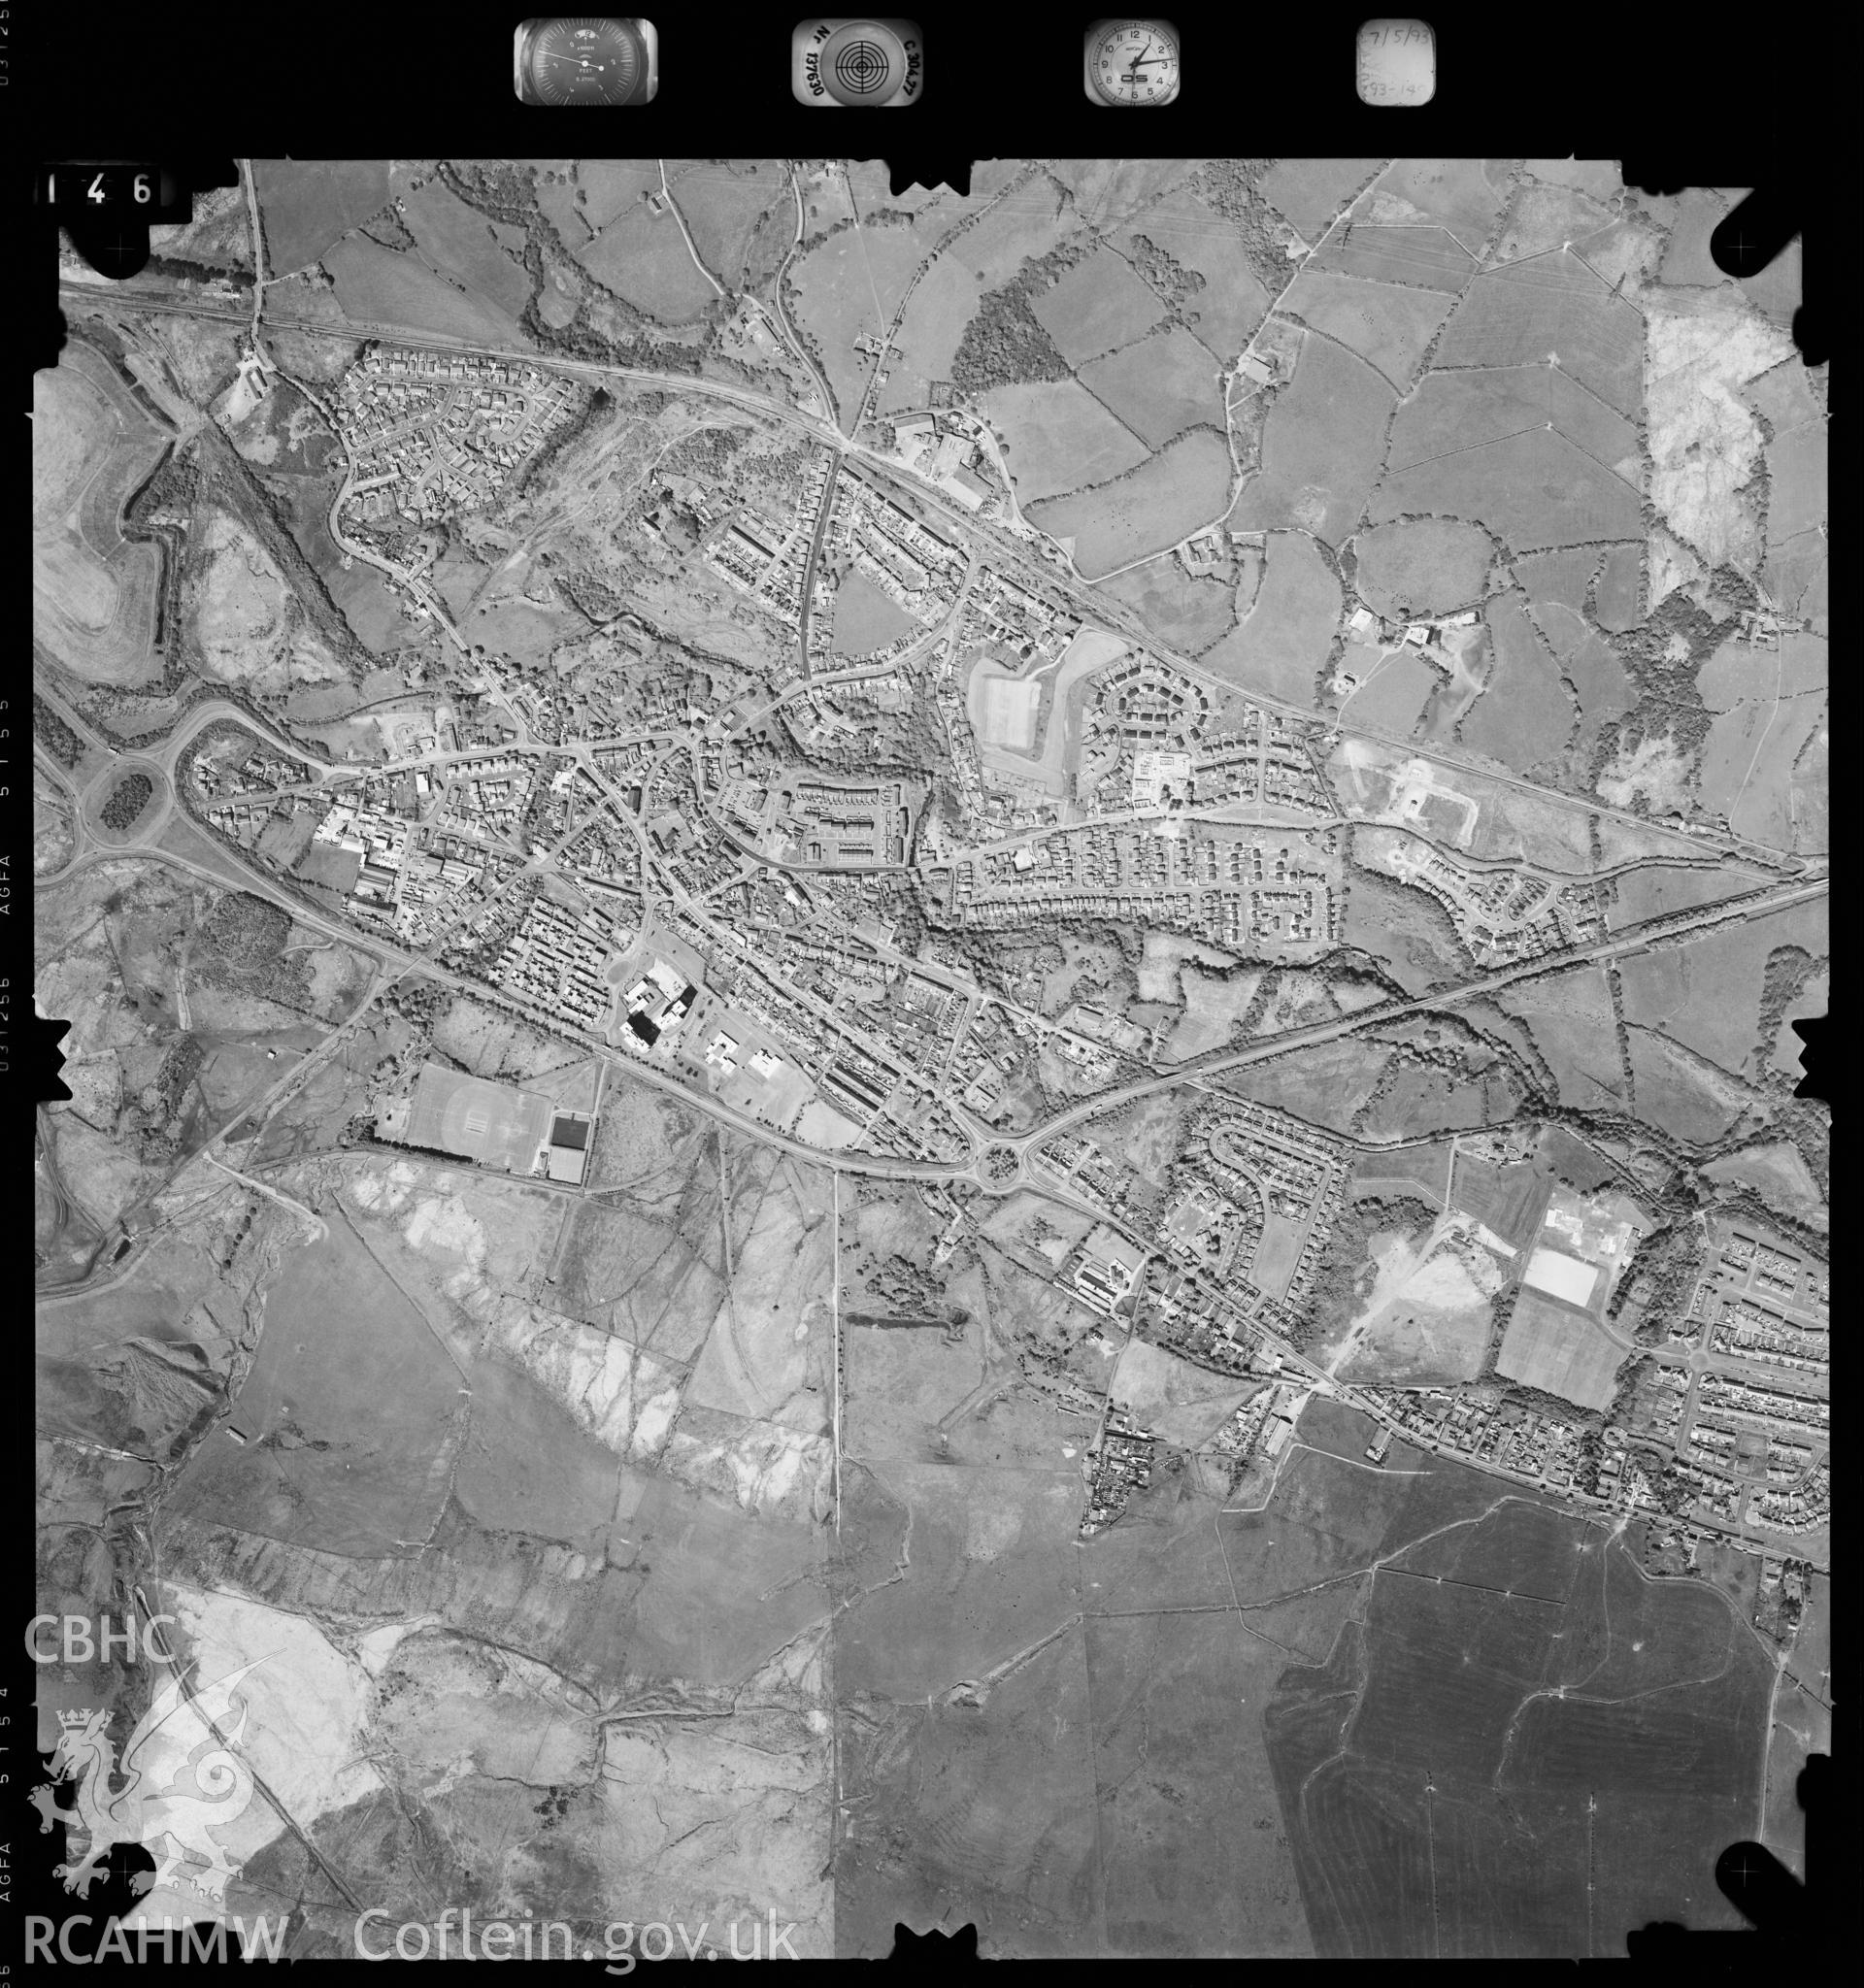 Digitized copy of an aerial photograph showing the Hirwaun area, taken by Ordnance Survey, 1993.